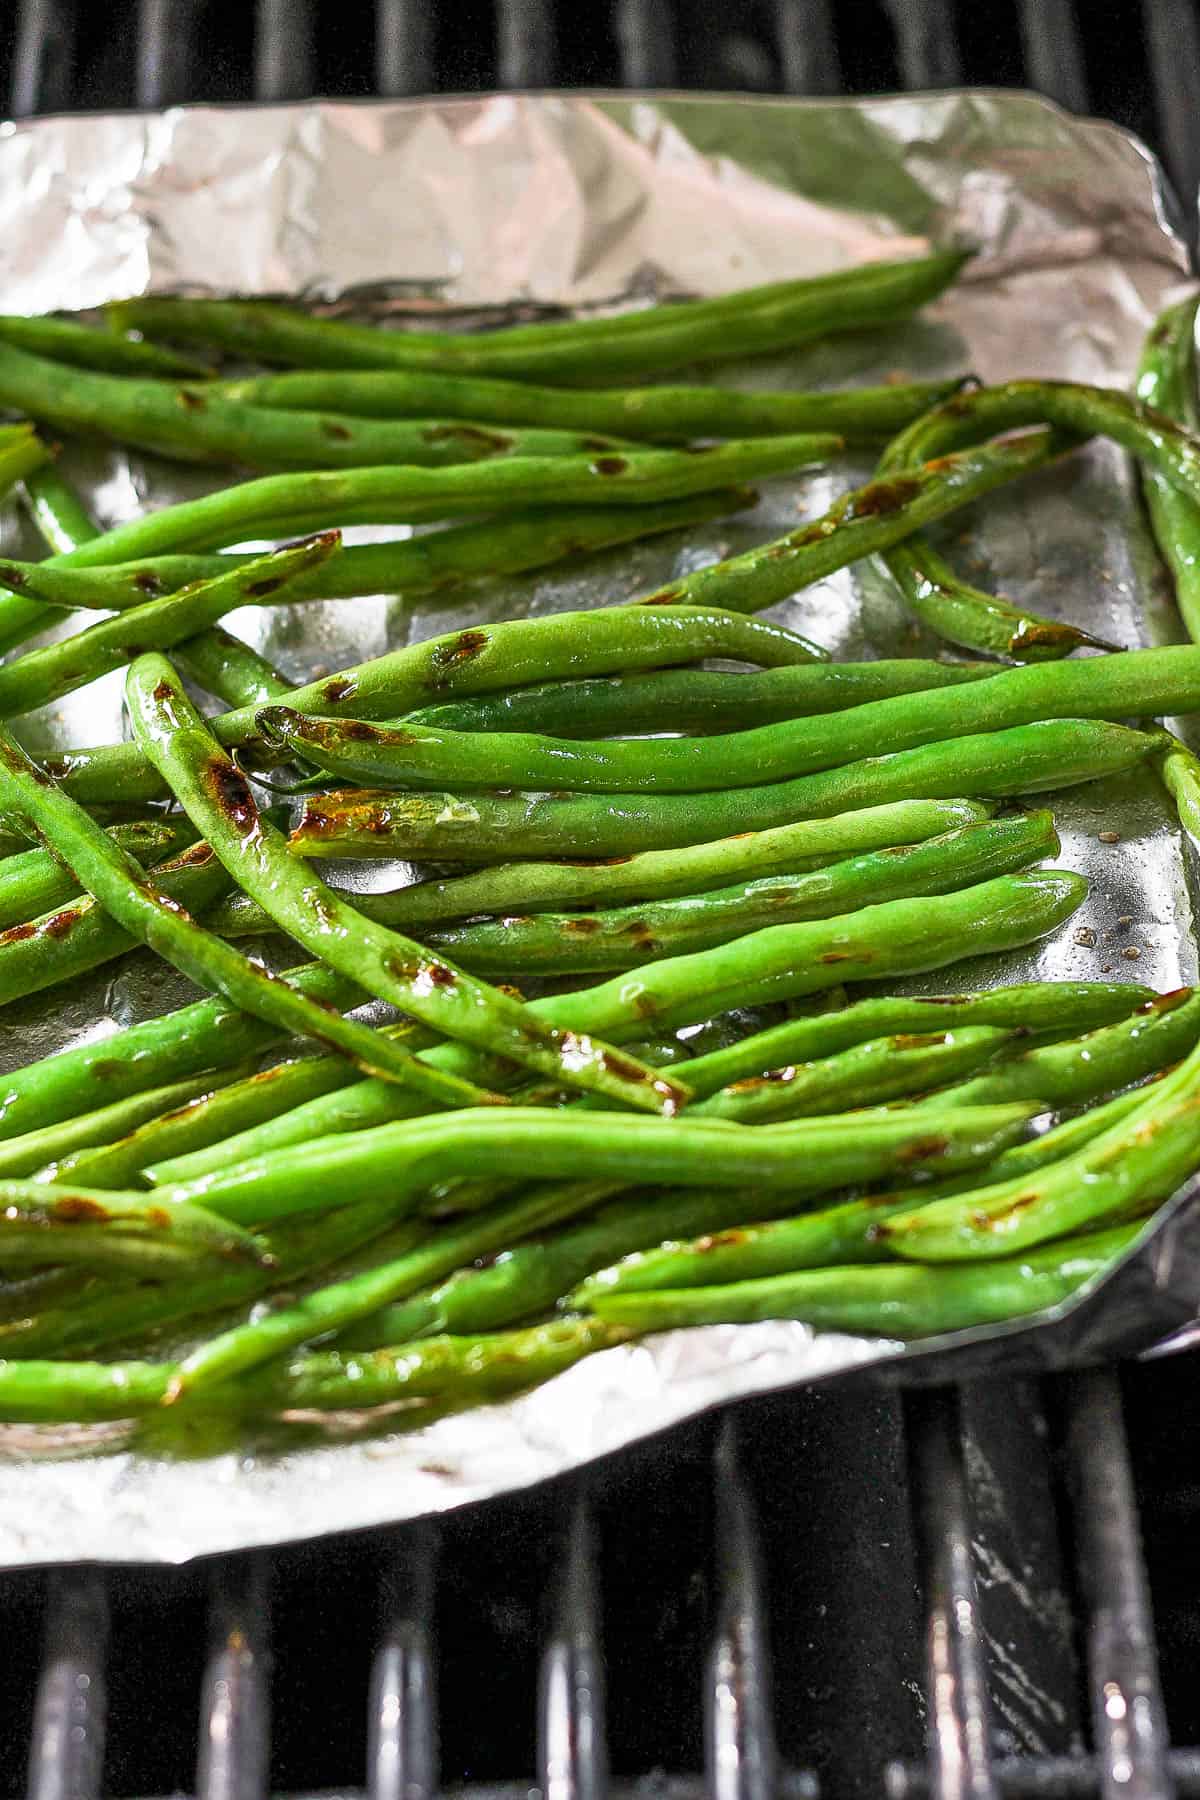 Green beans on a aluminum foil tray on the grill.